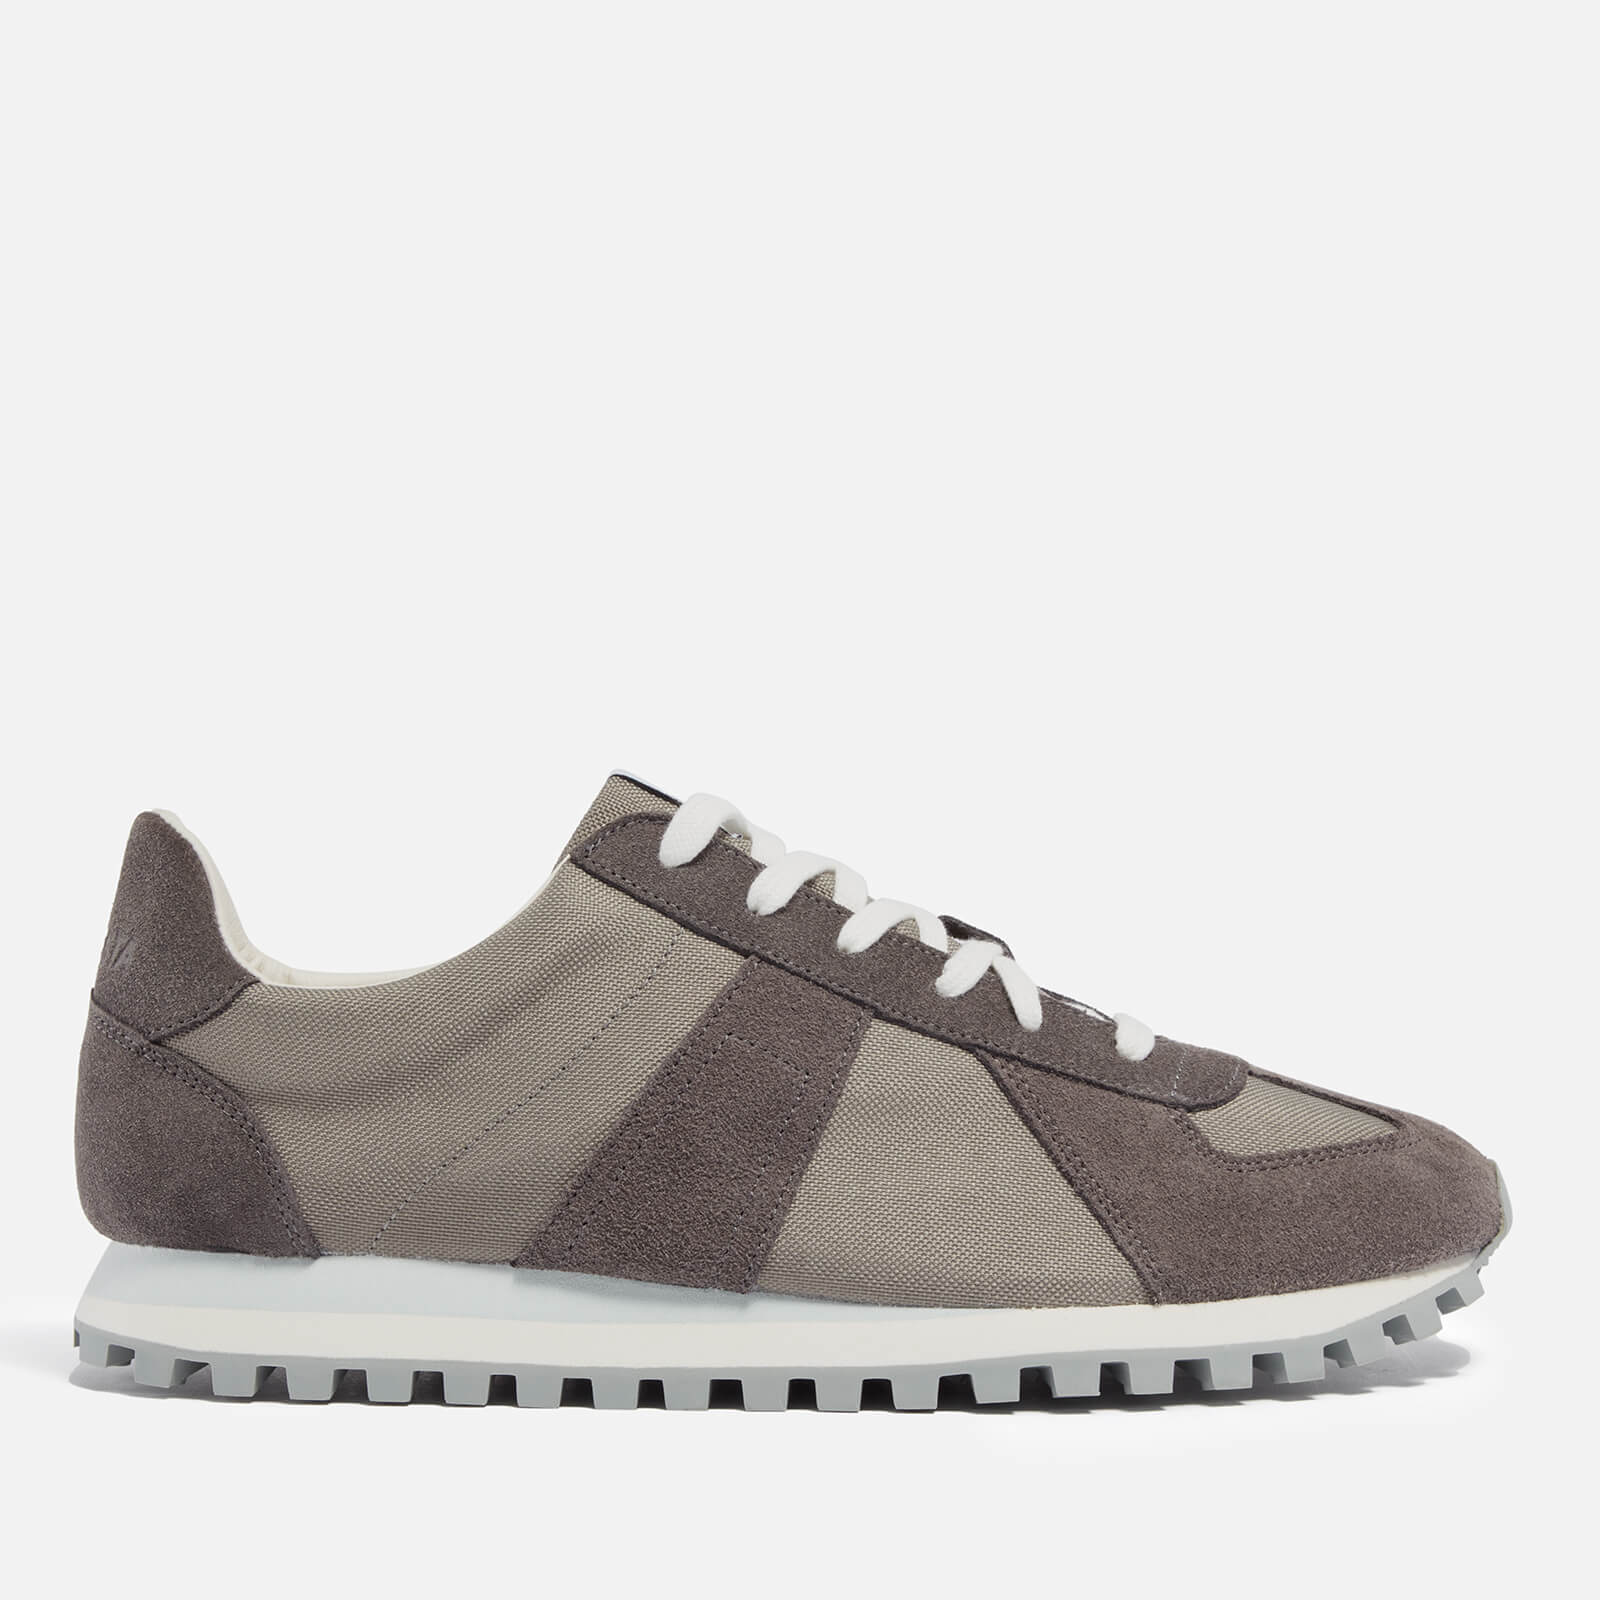 Novesta Men’s Gat Trail Canvas and Suede Running Style Trainers